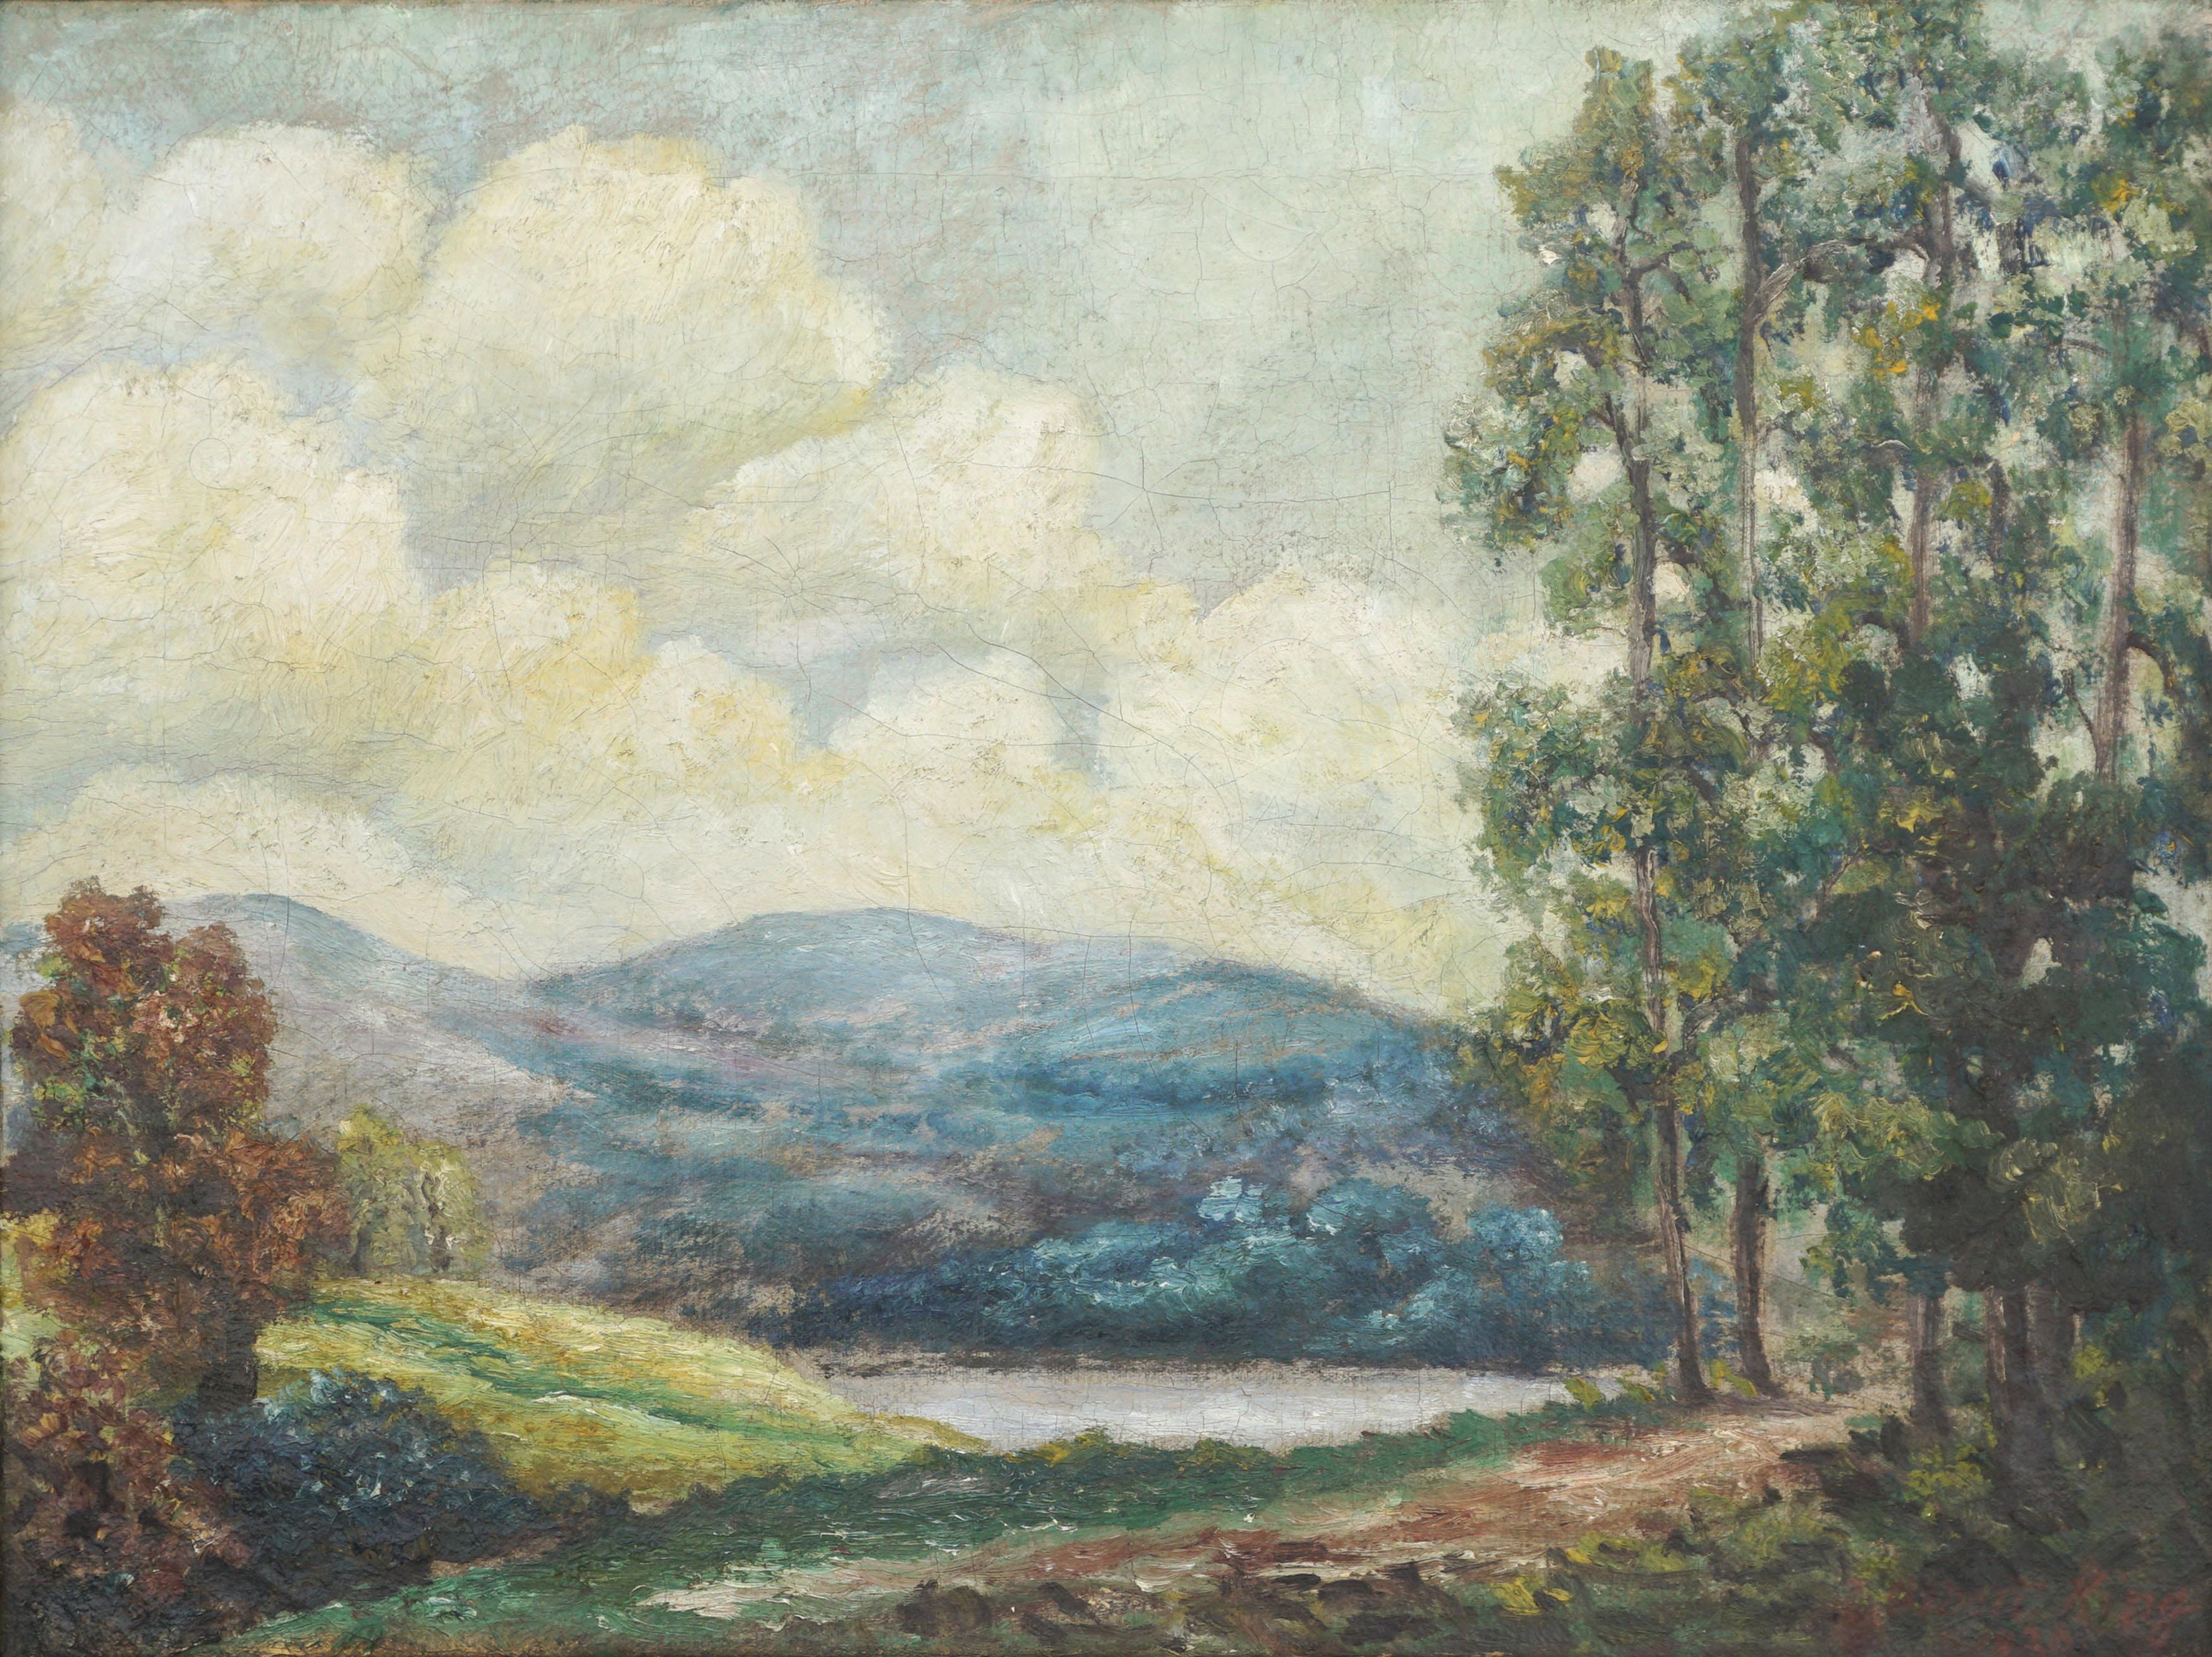 Early 20th Century California Hills Plein Air Landscape, 1920s - Painting by Albert King